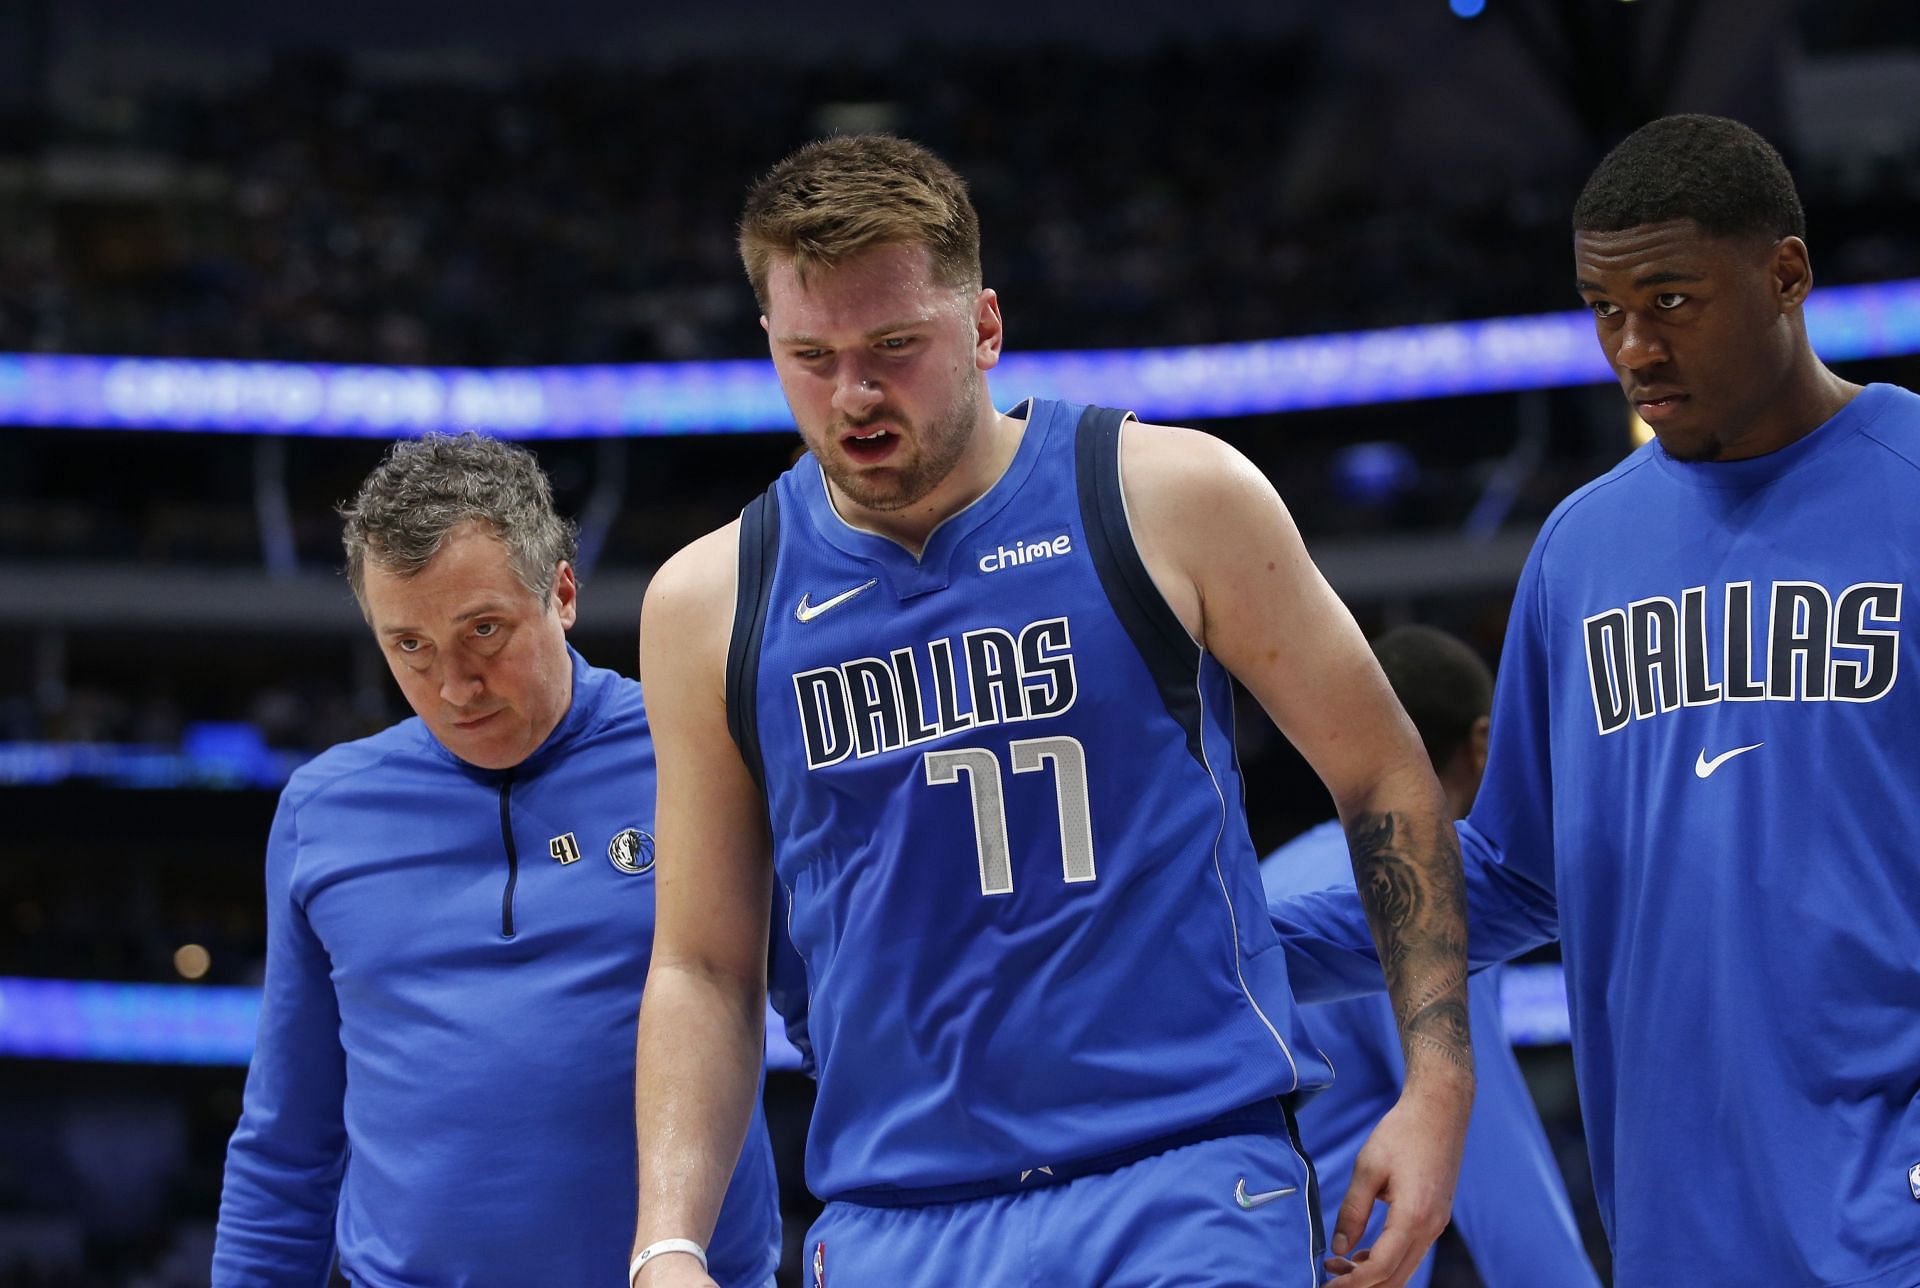 Luka Doncic No. 77 of the Dallas Mavericks leaves the court with an injury.